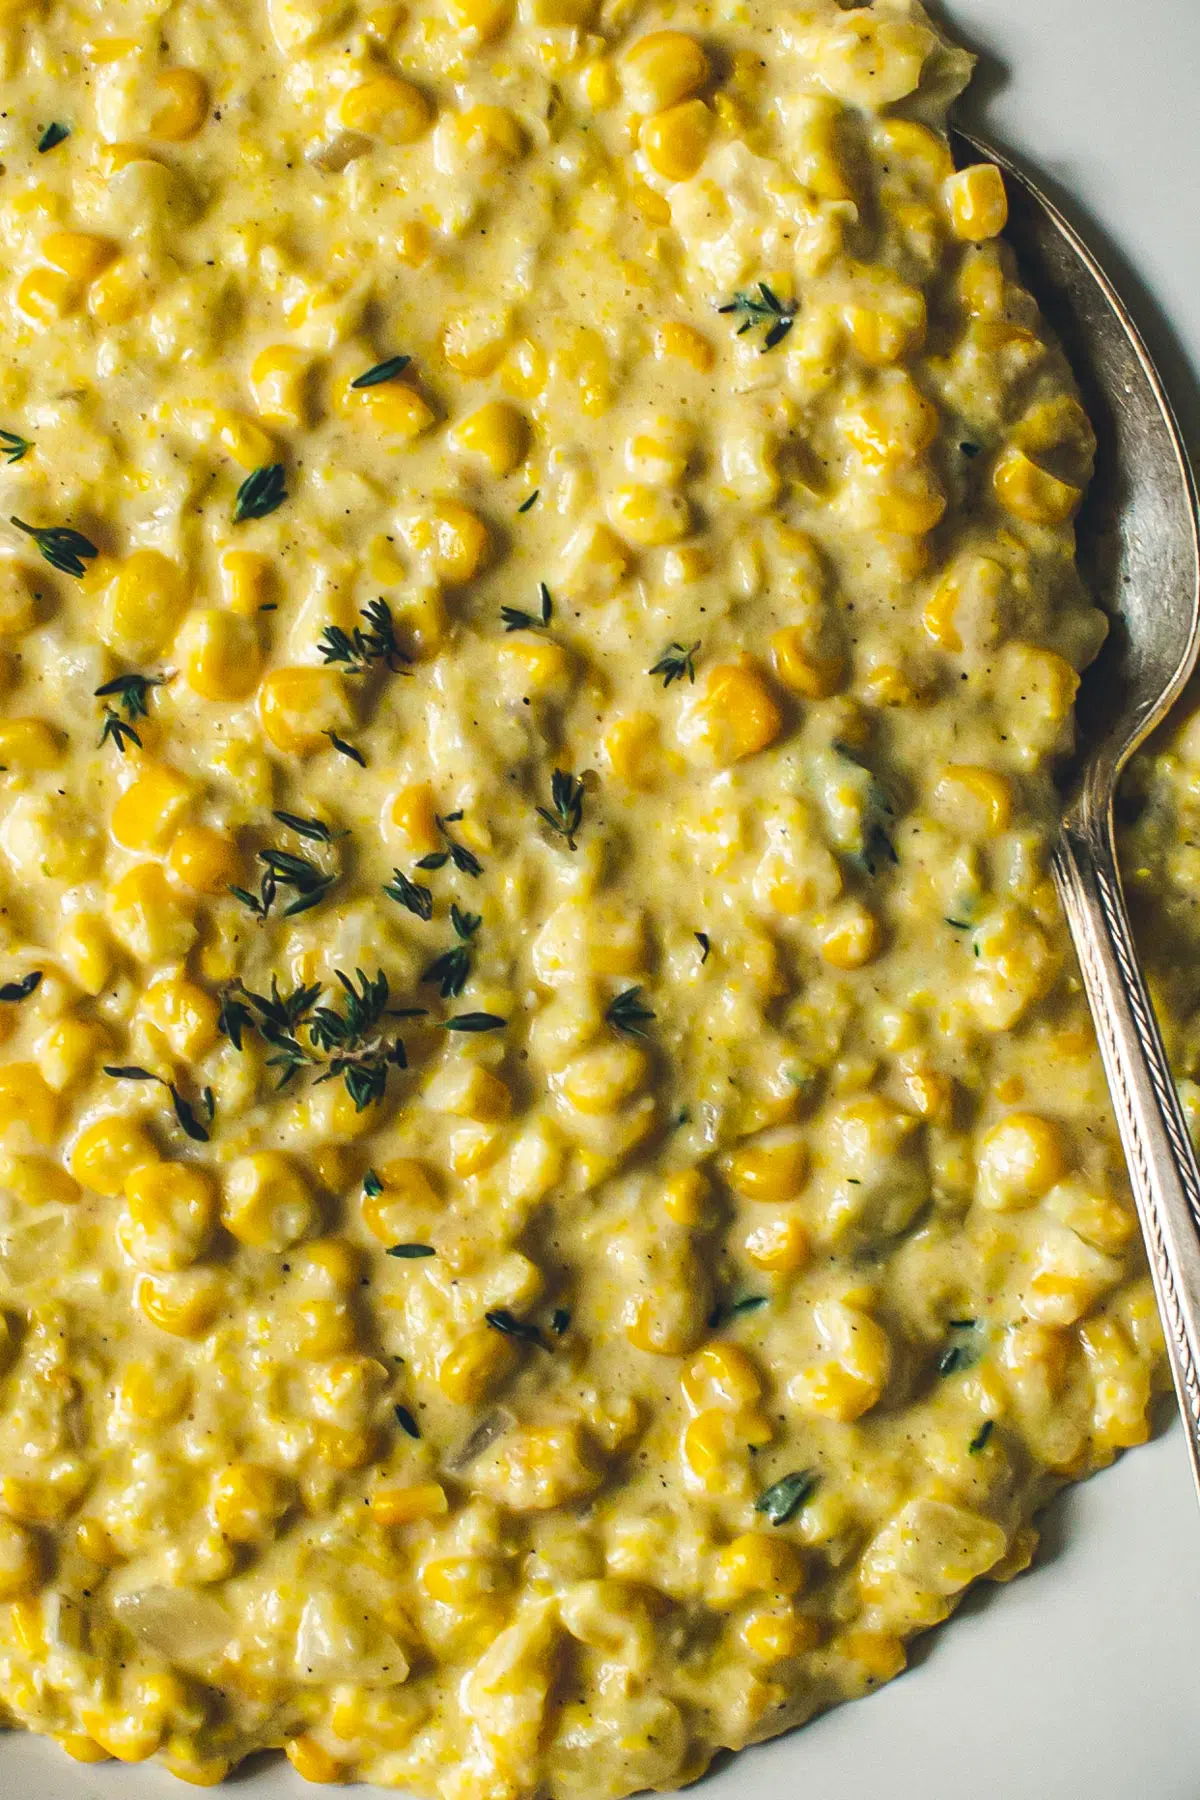 Creamed corn with fresh thyme on top and a silver serving spoon.